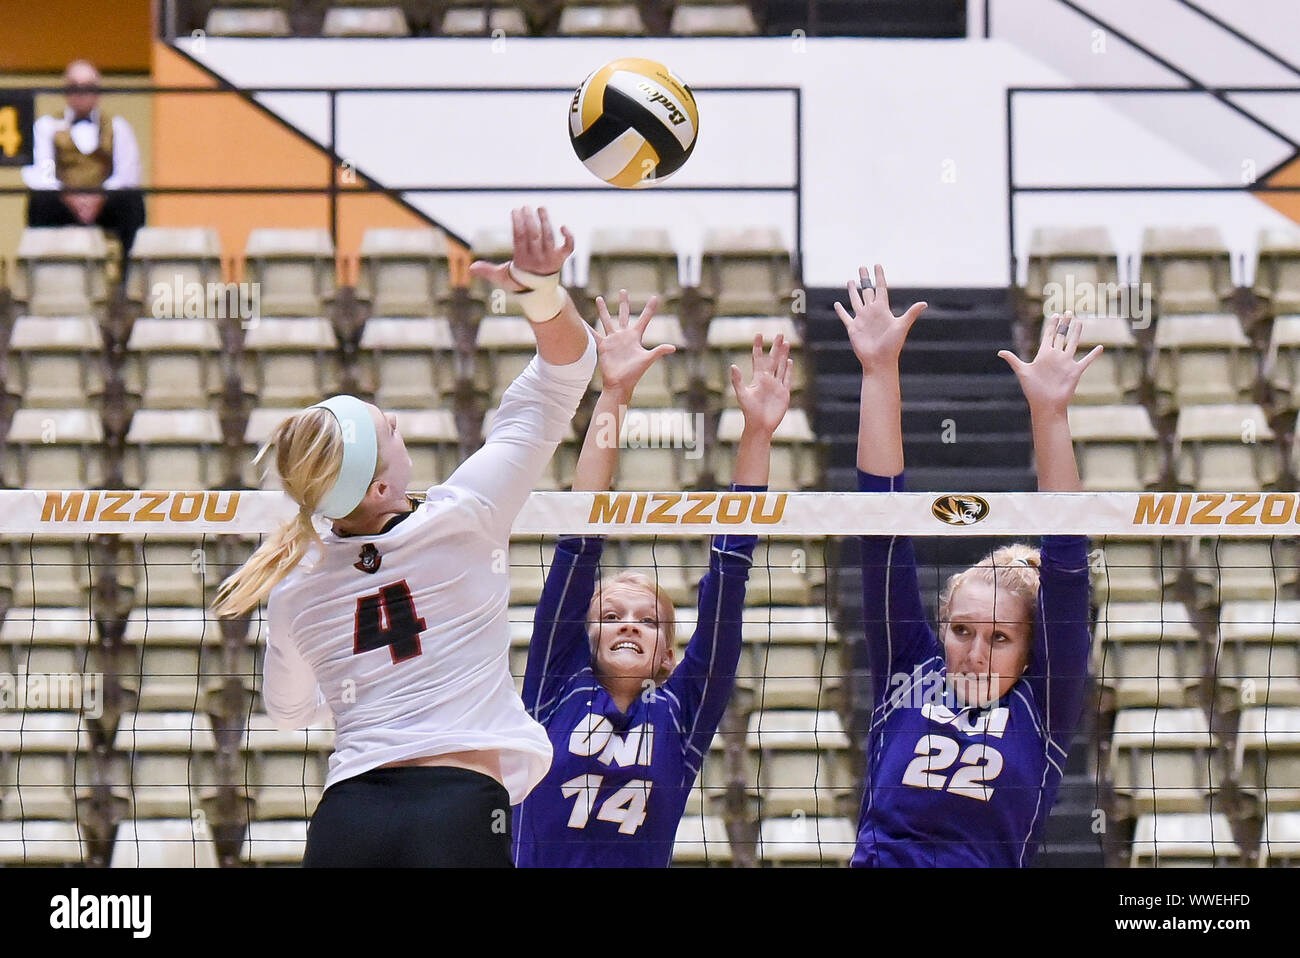 Sep 15, 2019: Austin Peay outside hitter/defensive specialist Chloe Stitt (4) tries to hit the ball past the blocking of University of Northern Iowa setter Rachel Koop (14) and University of Northern Iowa middle blocker Kat Barr (22) during part of the Mizzou Invitational tournament where University of Northern Iowa played Austin Peay, held at The Hearnes Center in Columbia, MO Richard Ulreich/CSM Stock Photo